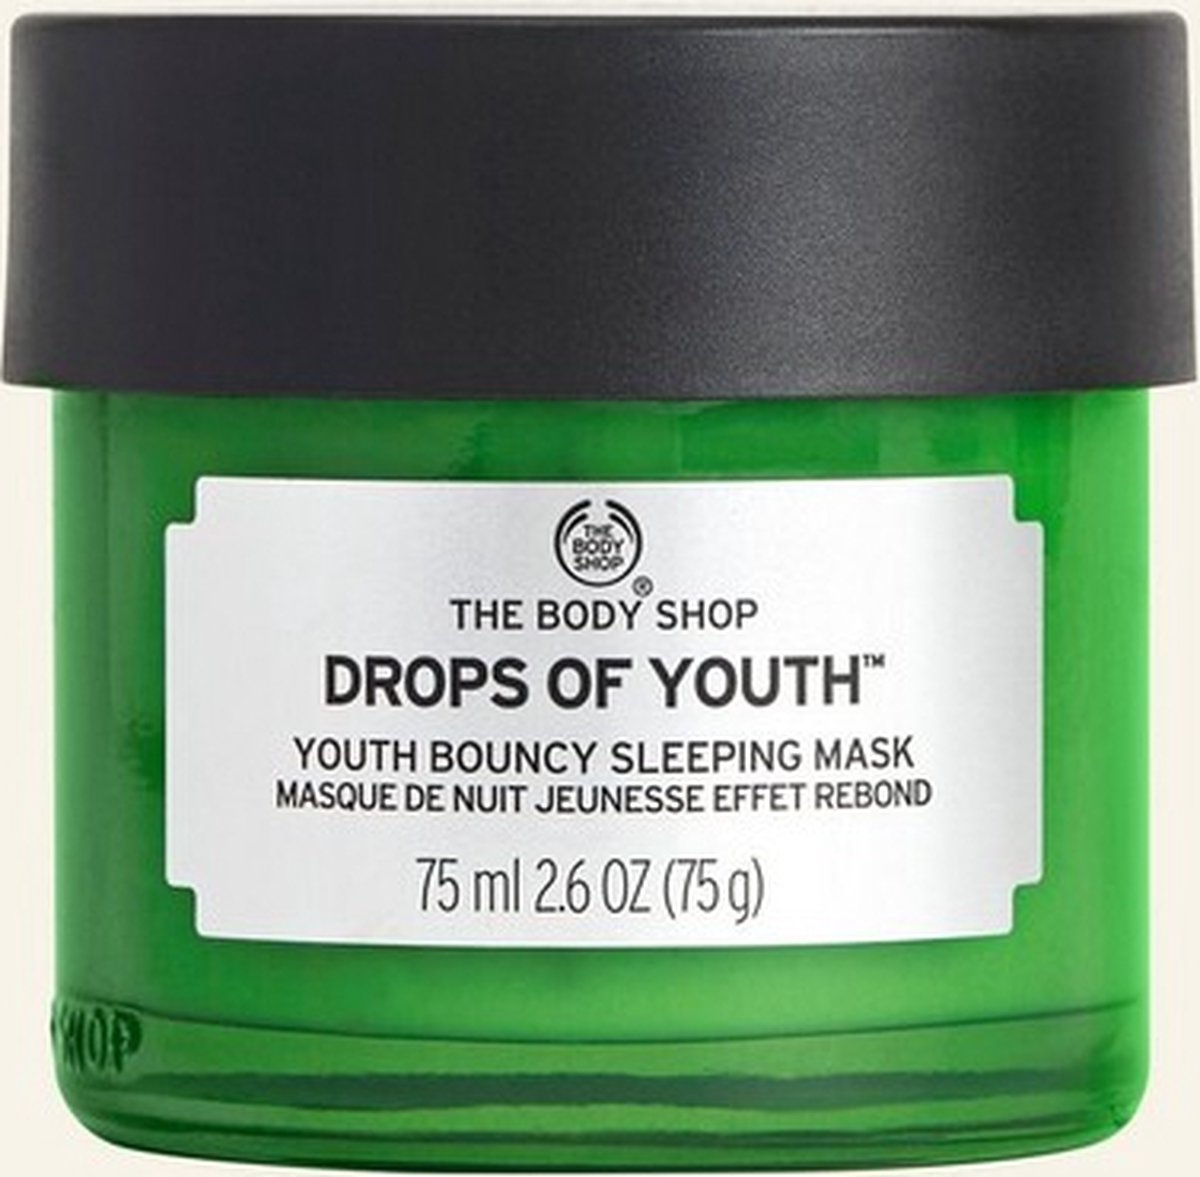 The Body Shop Drops Of Youth Bouncy Sleeping Mask - 75ml